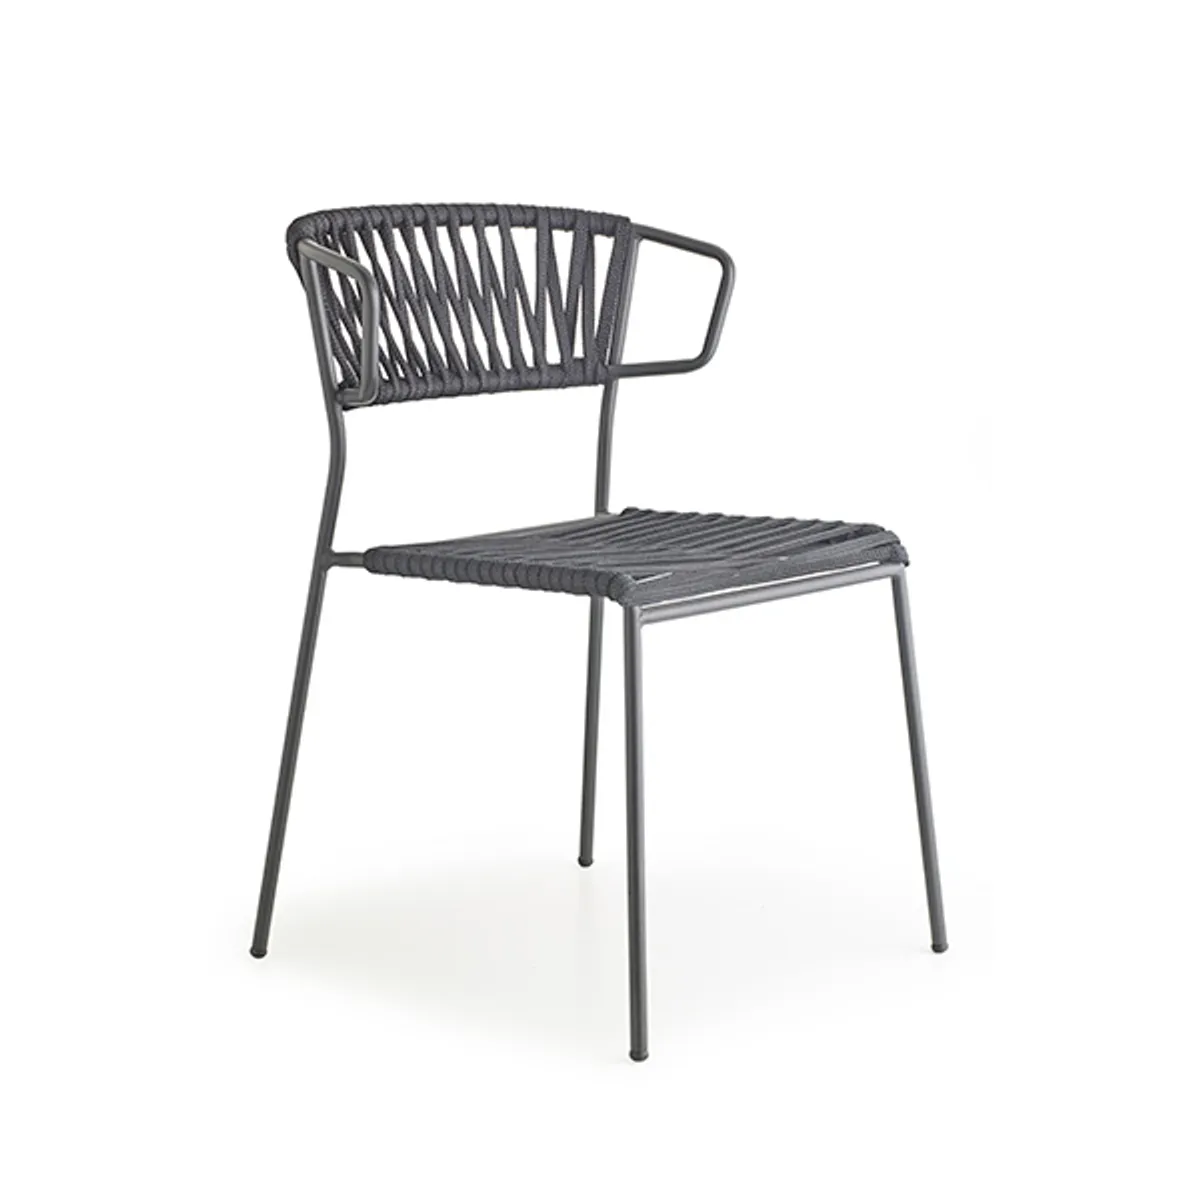 Robyn Weave Chair Outdoor Hospitality Furniture Insideoutcontracts Black